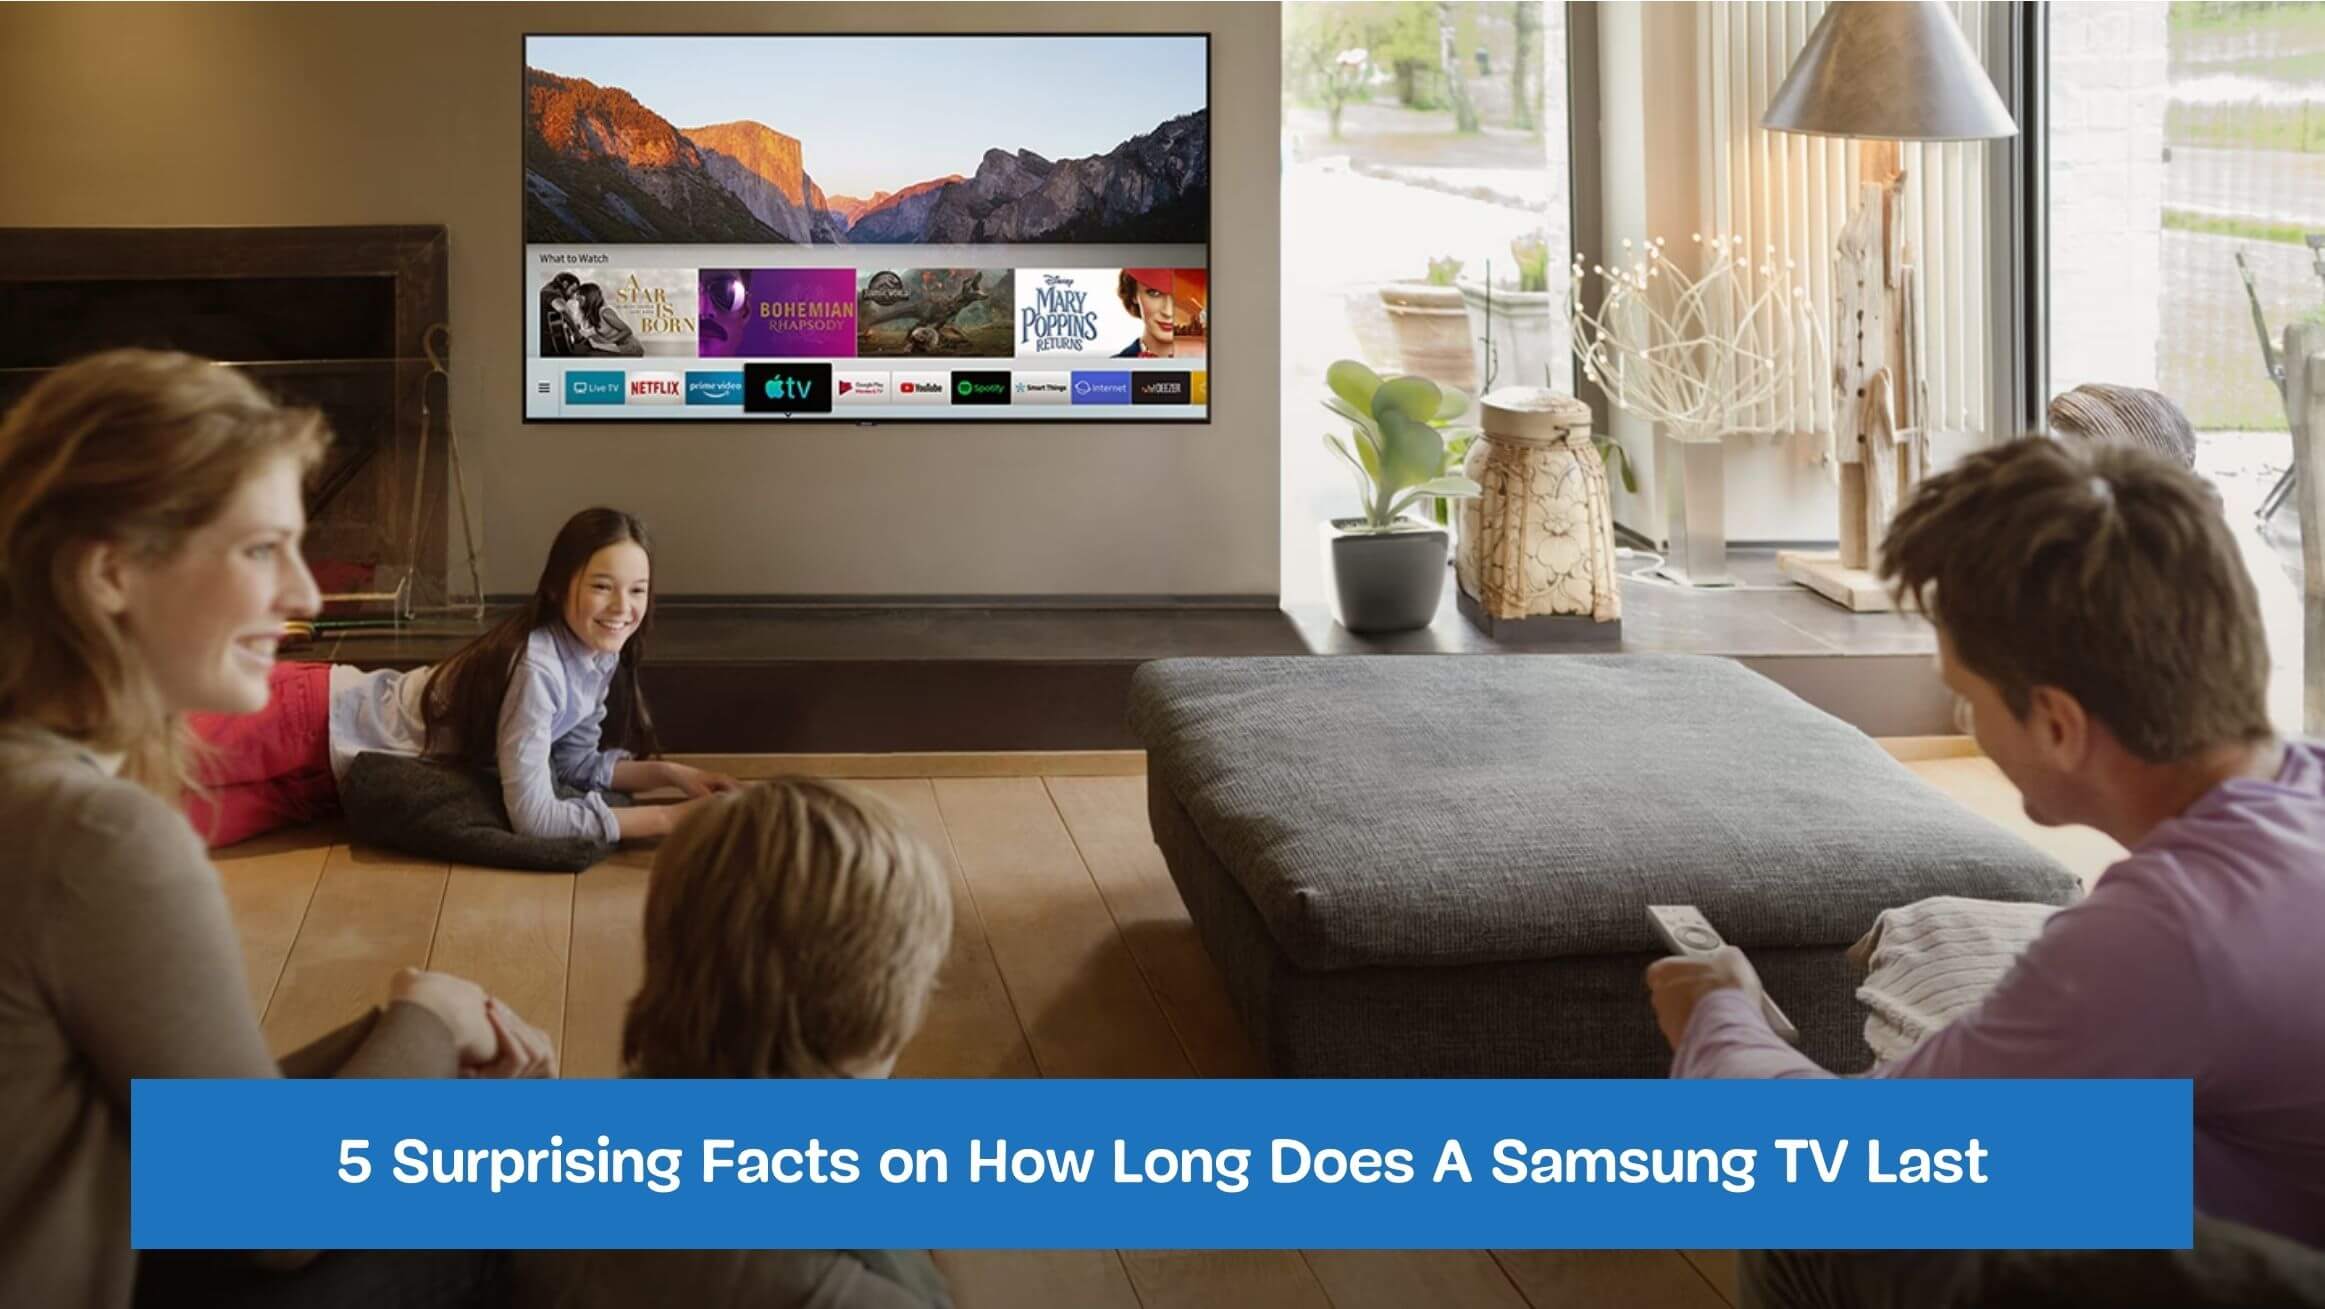 5 Surprising Facts on How Long Does A Samsung TV Last